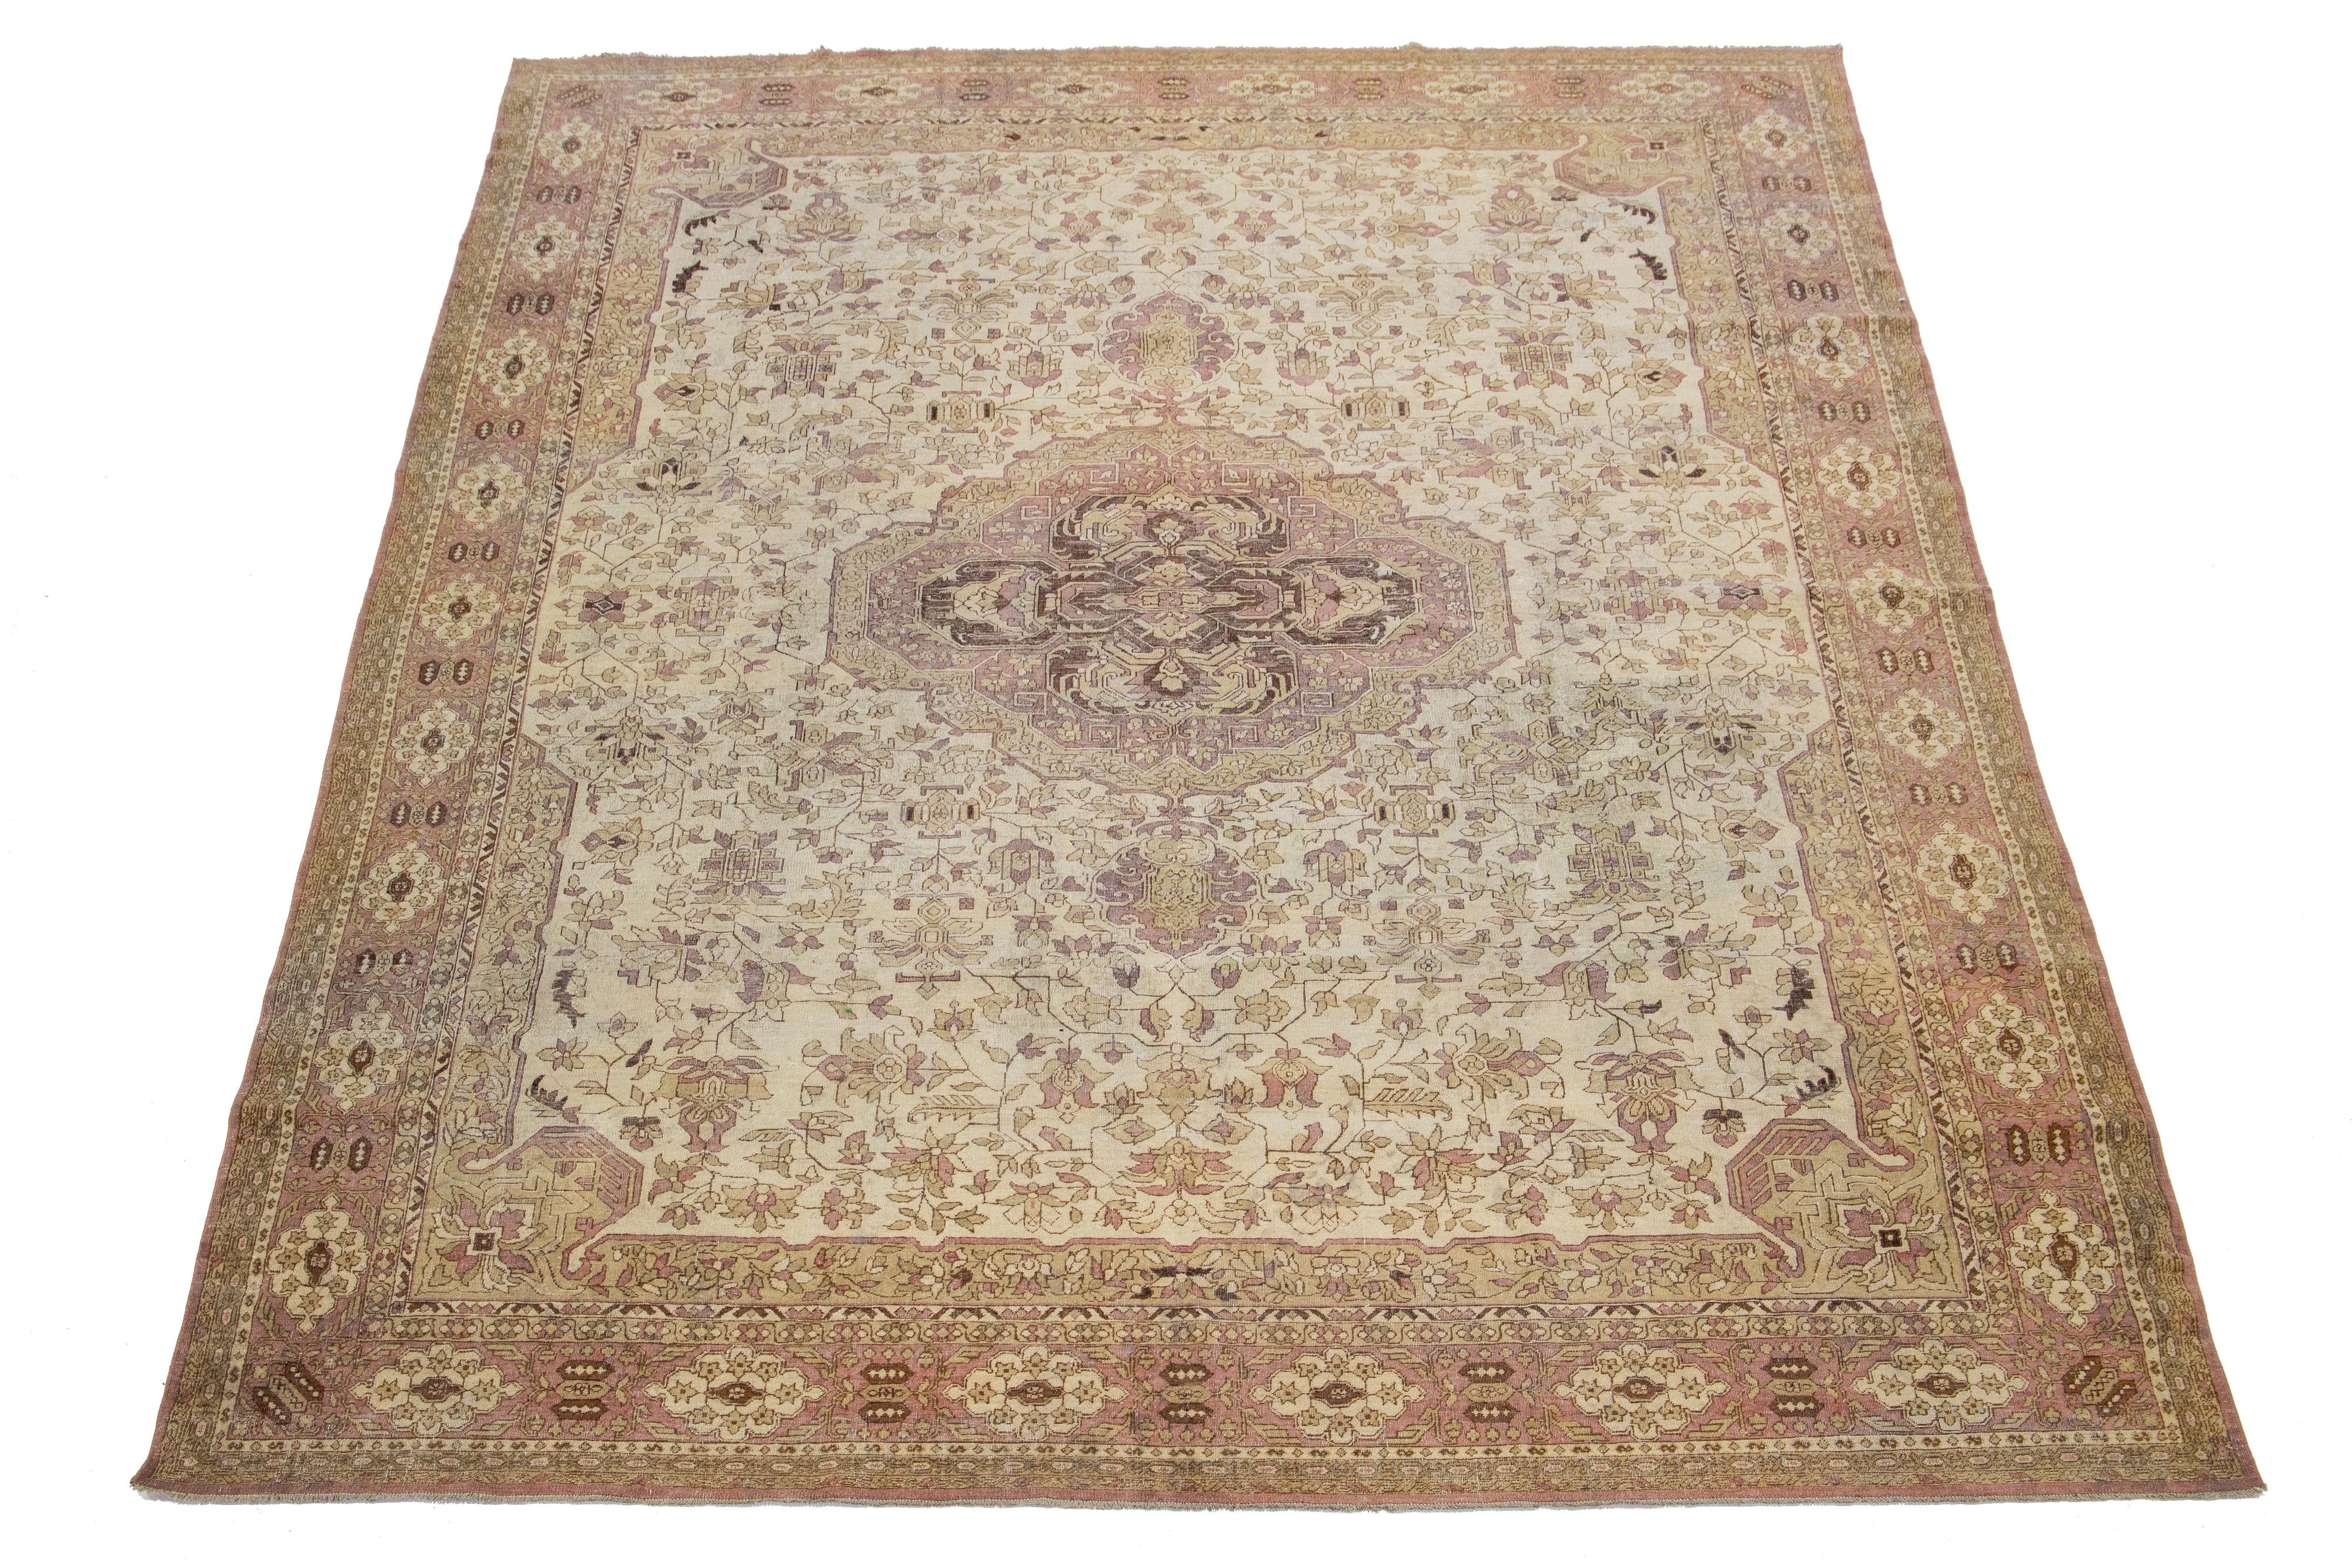 This exquisite hand-knotted Agra wool rug features a beige field accented by brown and terracotta motifs in a timeless medallion floral pattern.

This rug measures 8'7